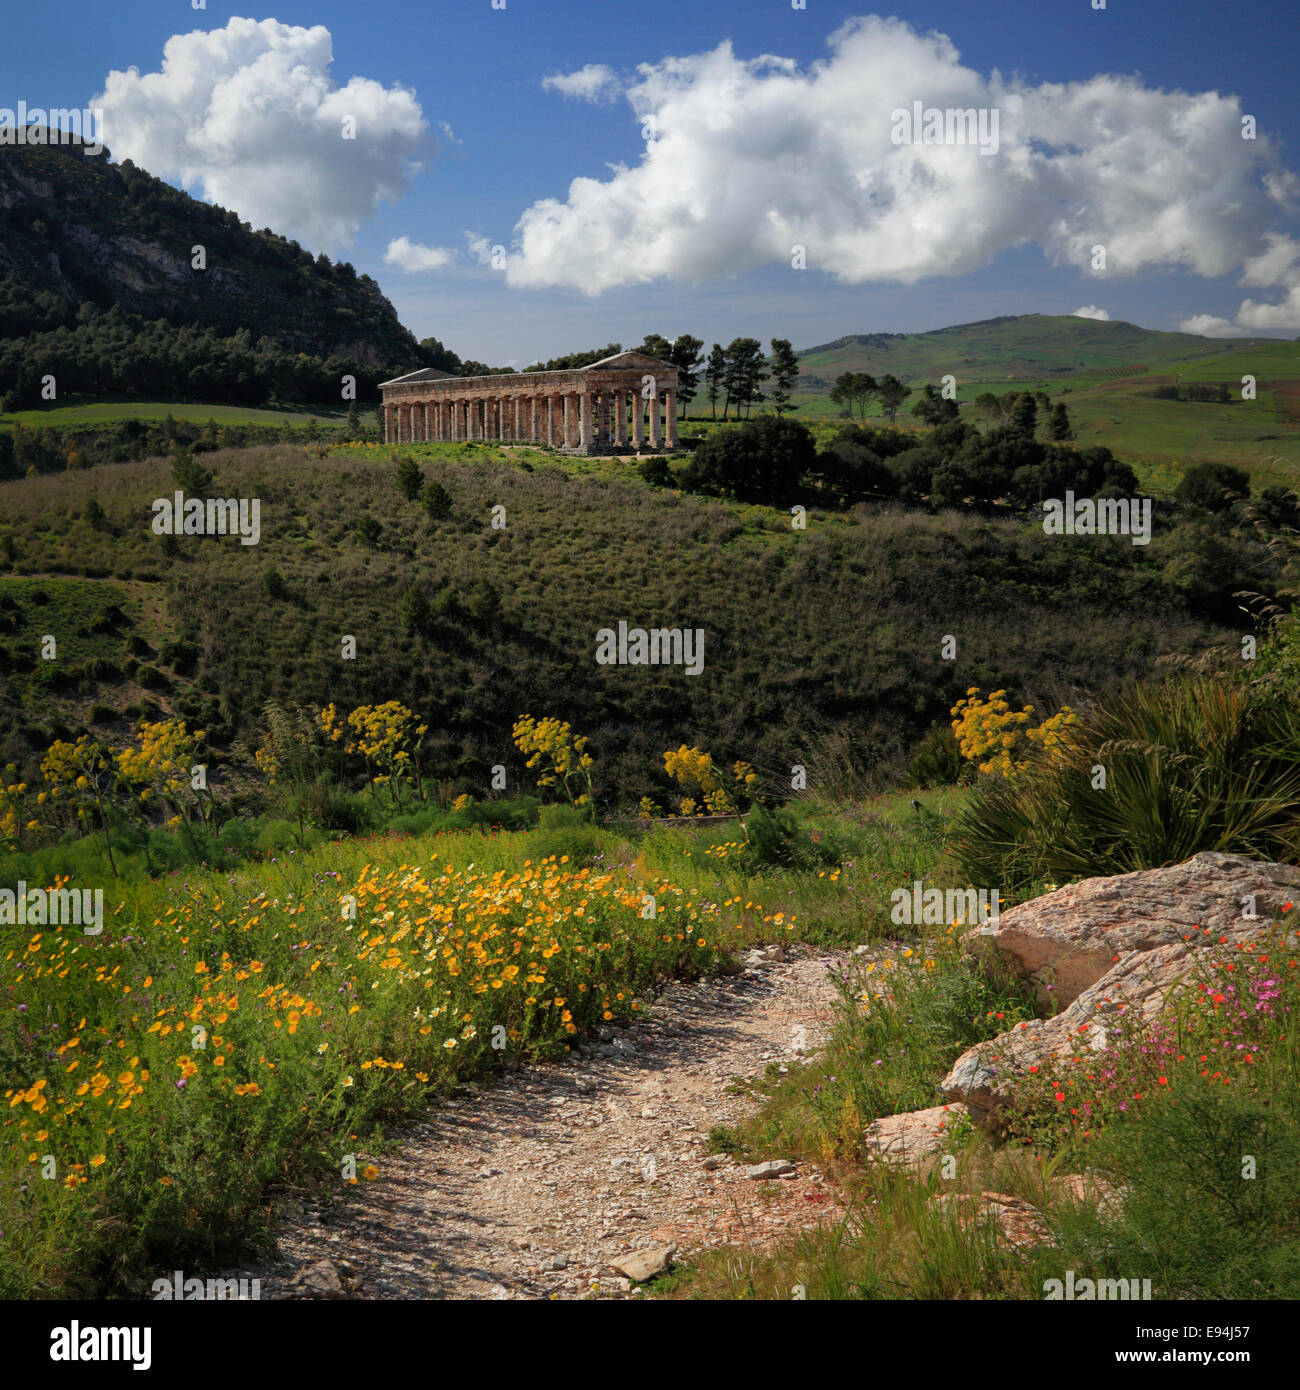 Ancient Temple of Segesta amidst flower covered countryside Stock Photo